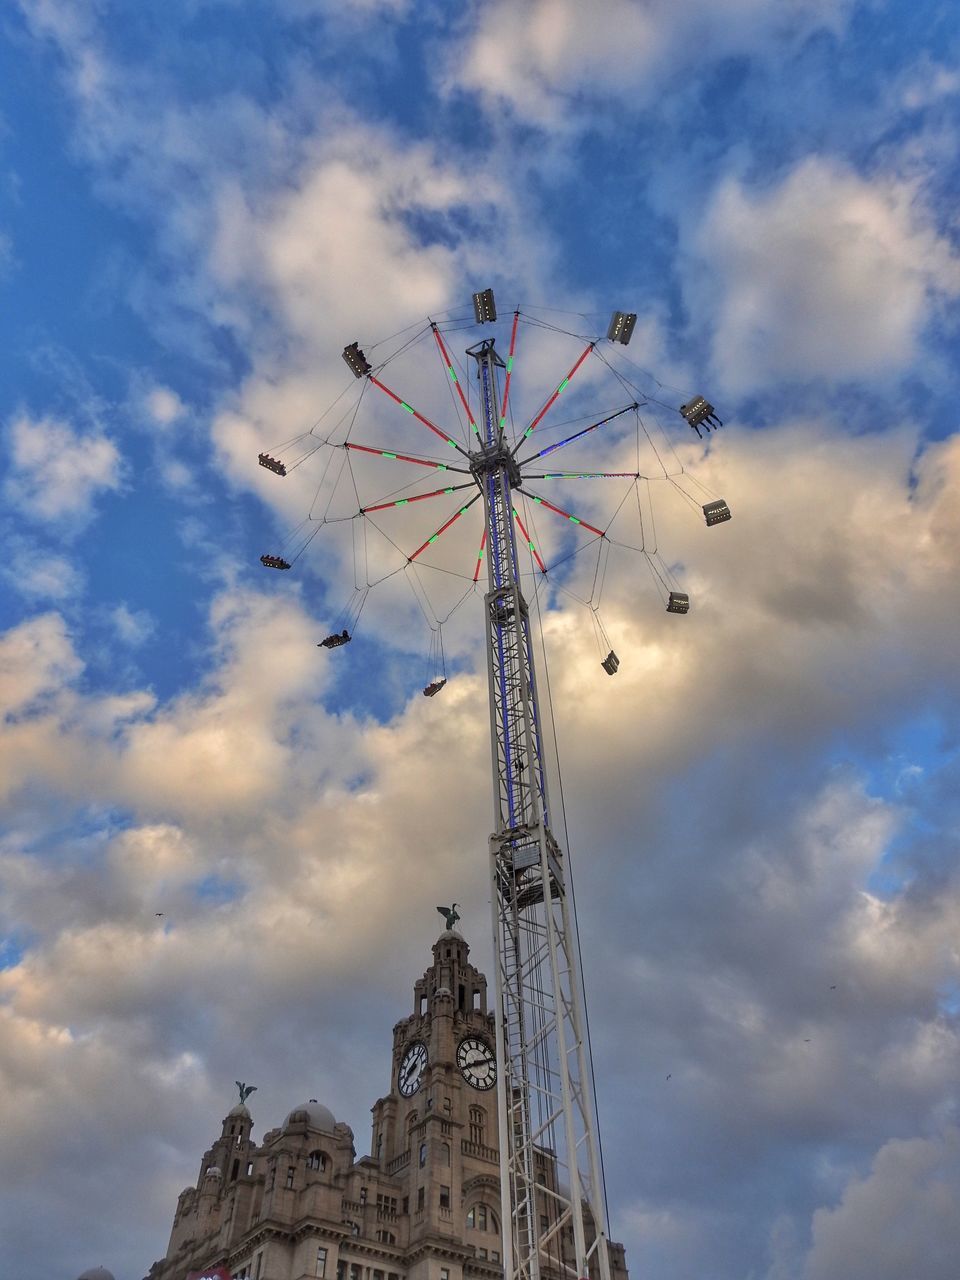 low angle view, sky, cloud - sky, built structure, architecture, arts culture and entertainment, cloud, tall - high, tower, amusement park ride, blue, amusement park, building exterior, day, tall, travel destinations, outdoors, development, high section, chain swing ride, no people, tourism, cloudy, spire, cumulus cloud